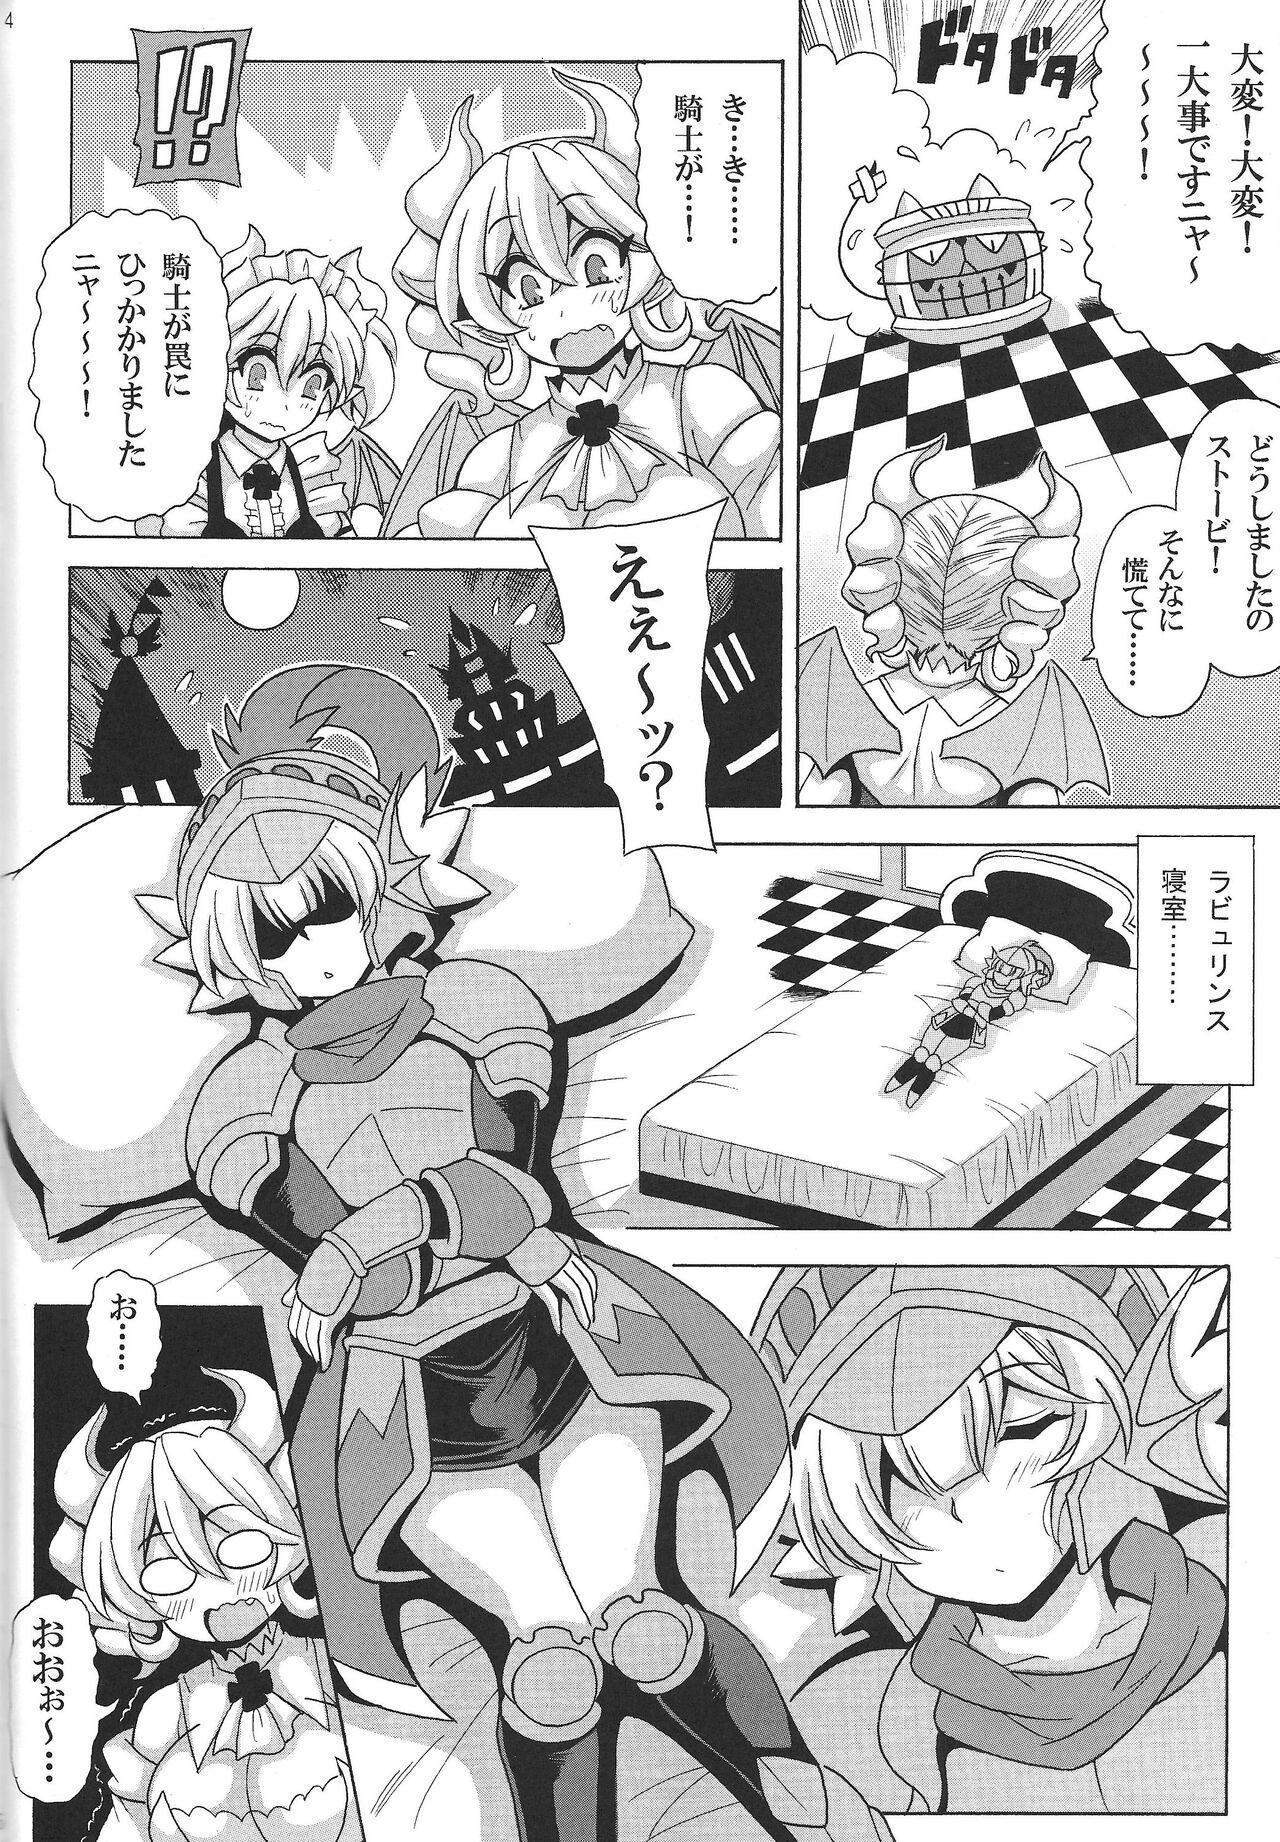 Cosplay LABRYNTH MILK - Yu-gi-oh Small Tits - Page 5